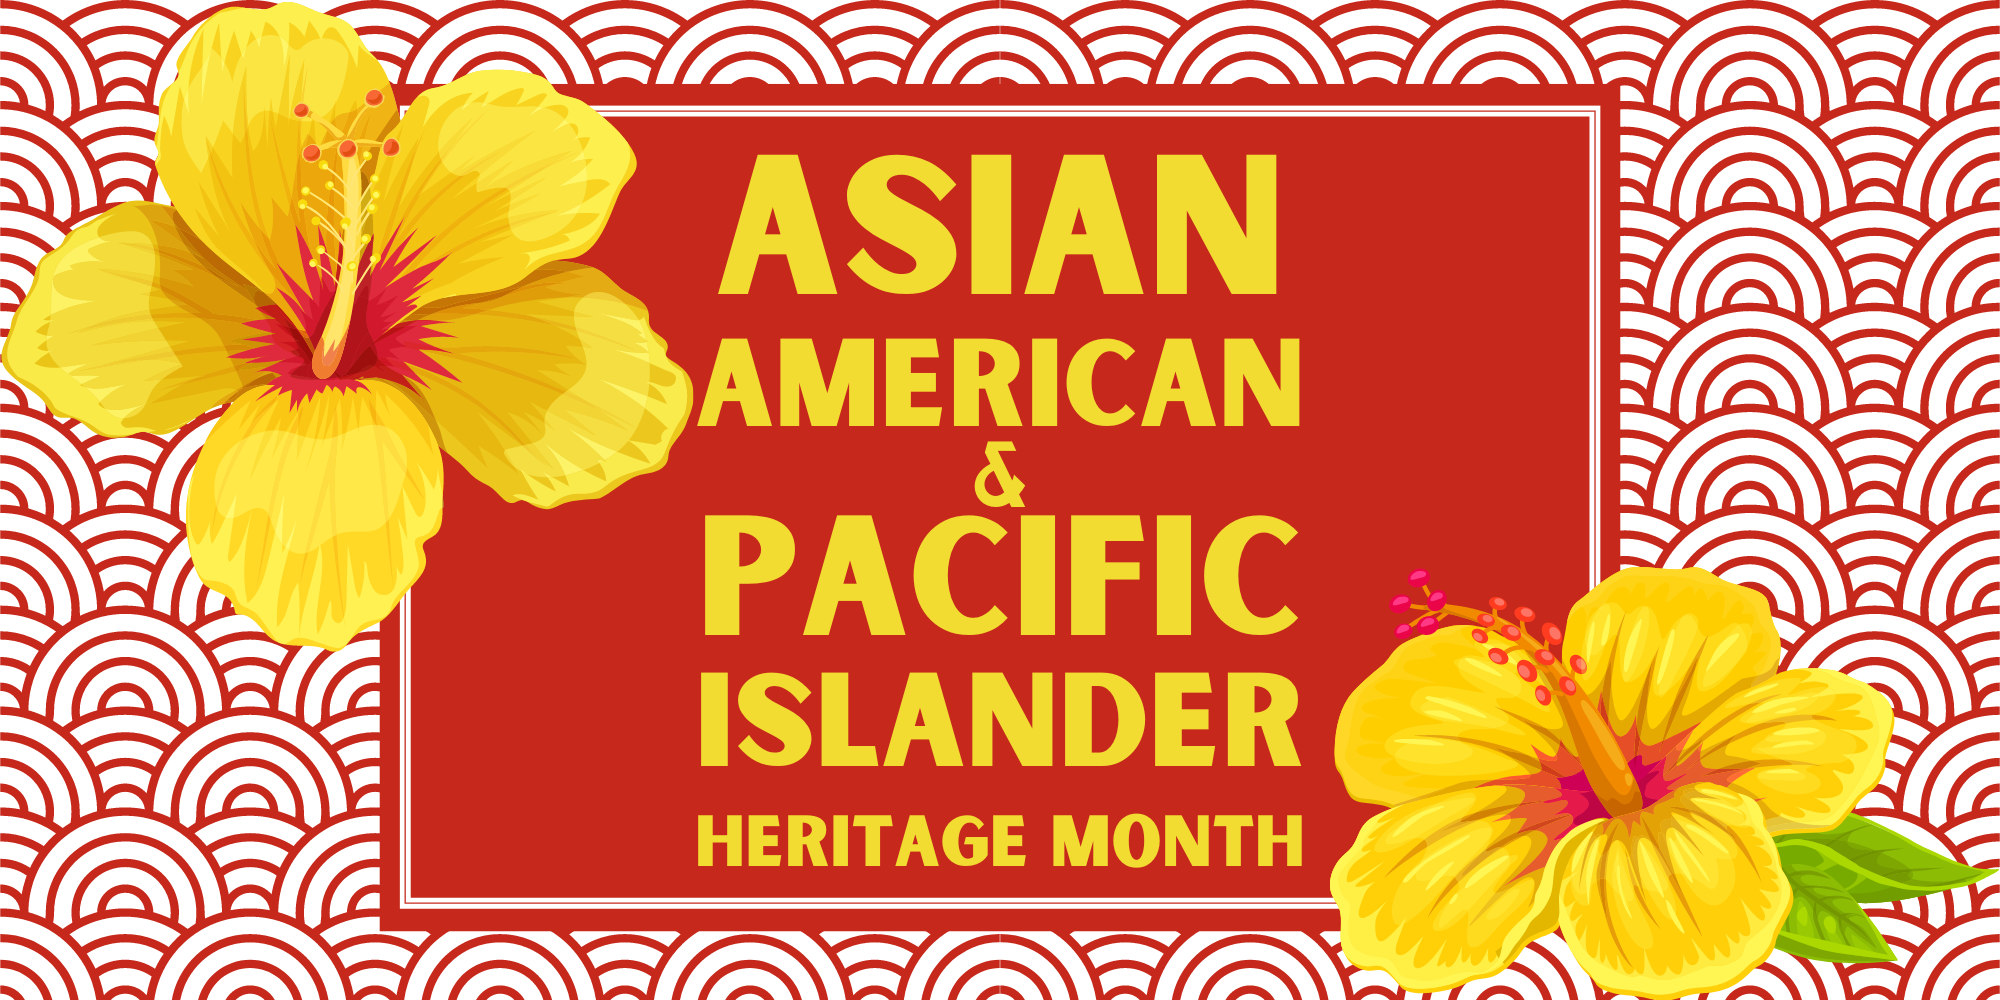 Asian American and Pacific Islander Heritage Month flyer with red background and yellow text with yellow tropical flowers